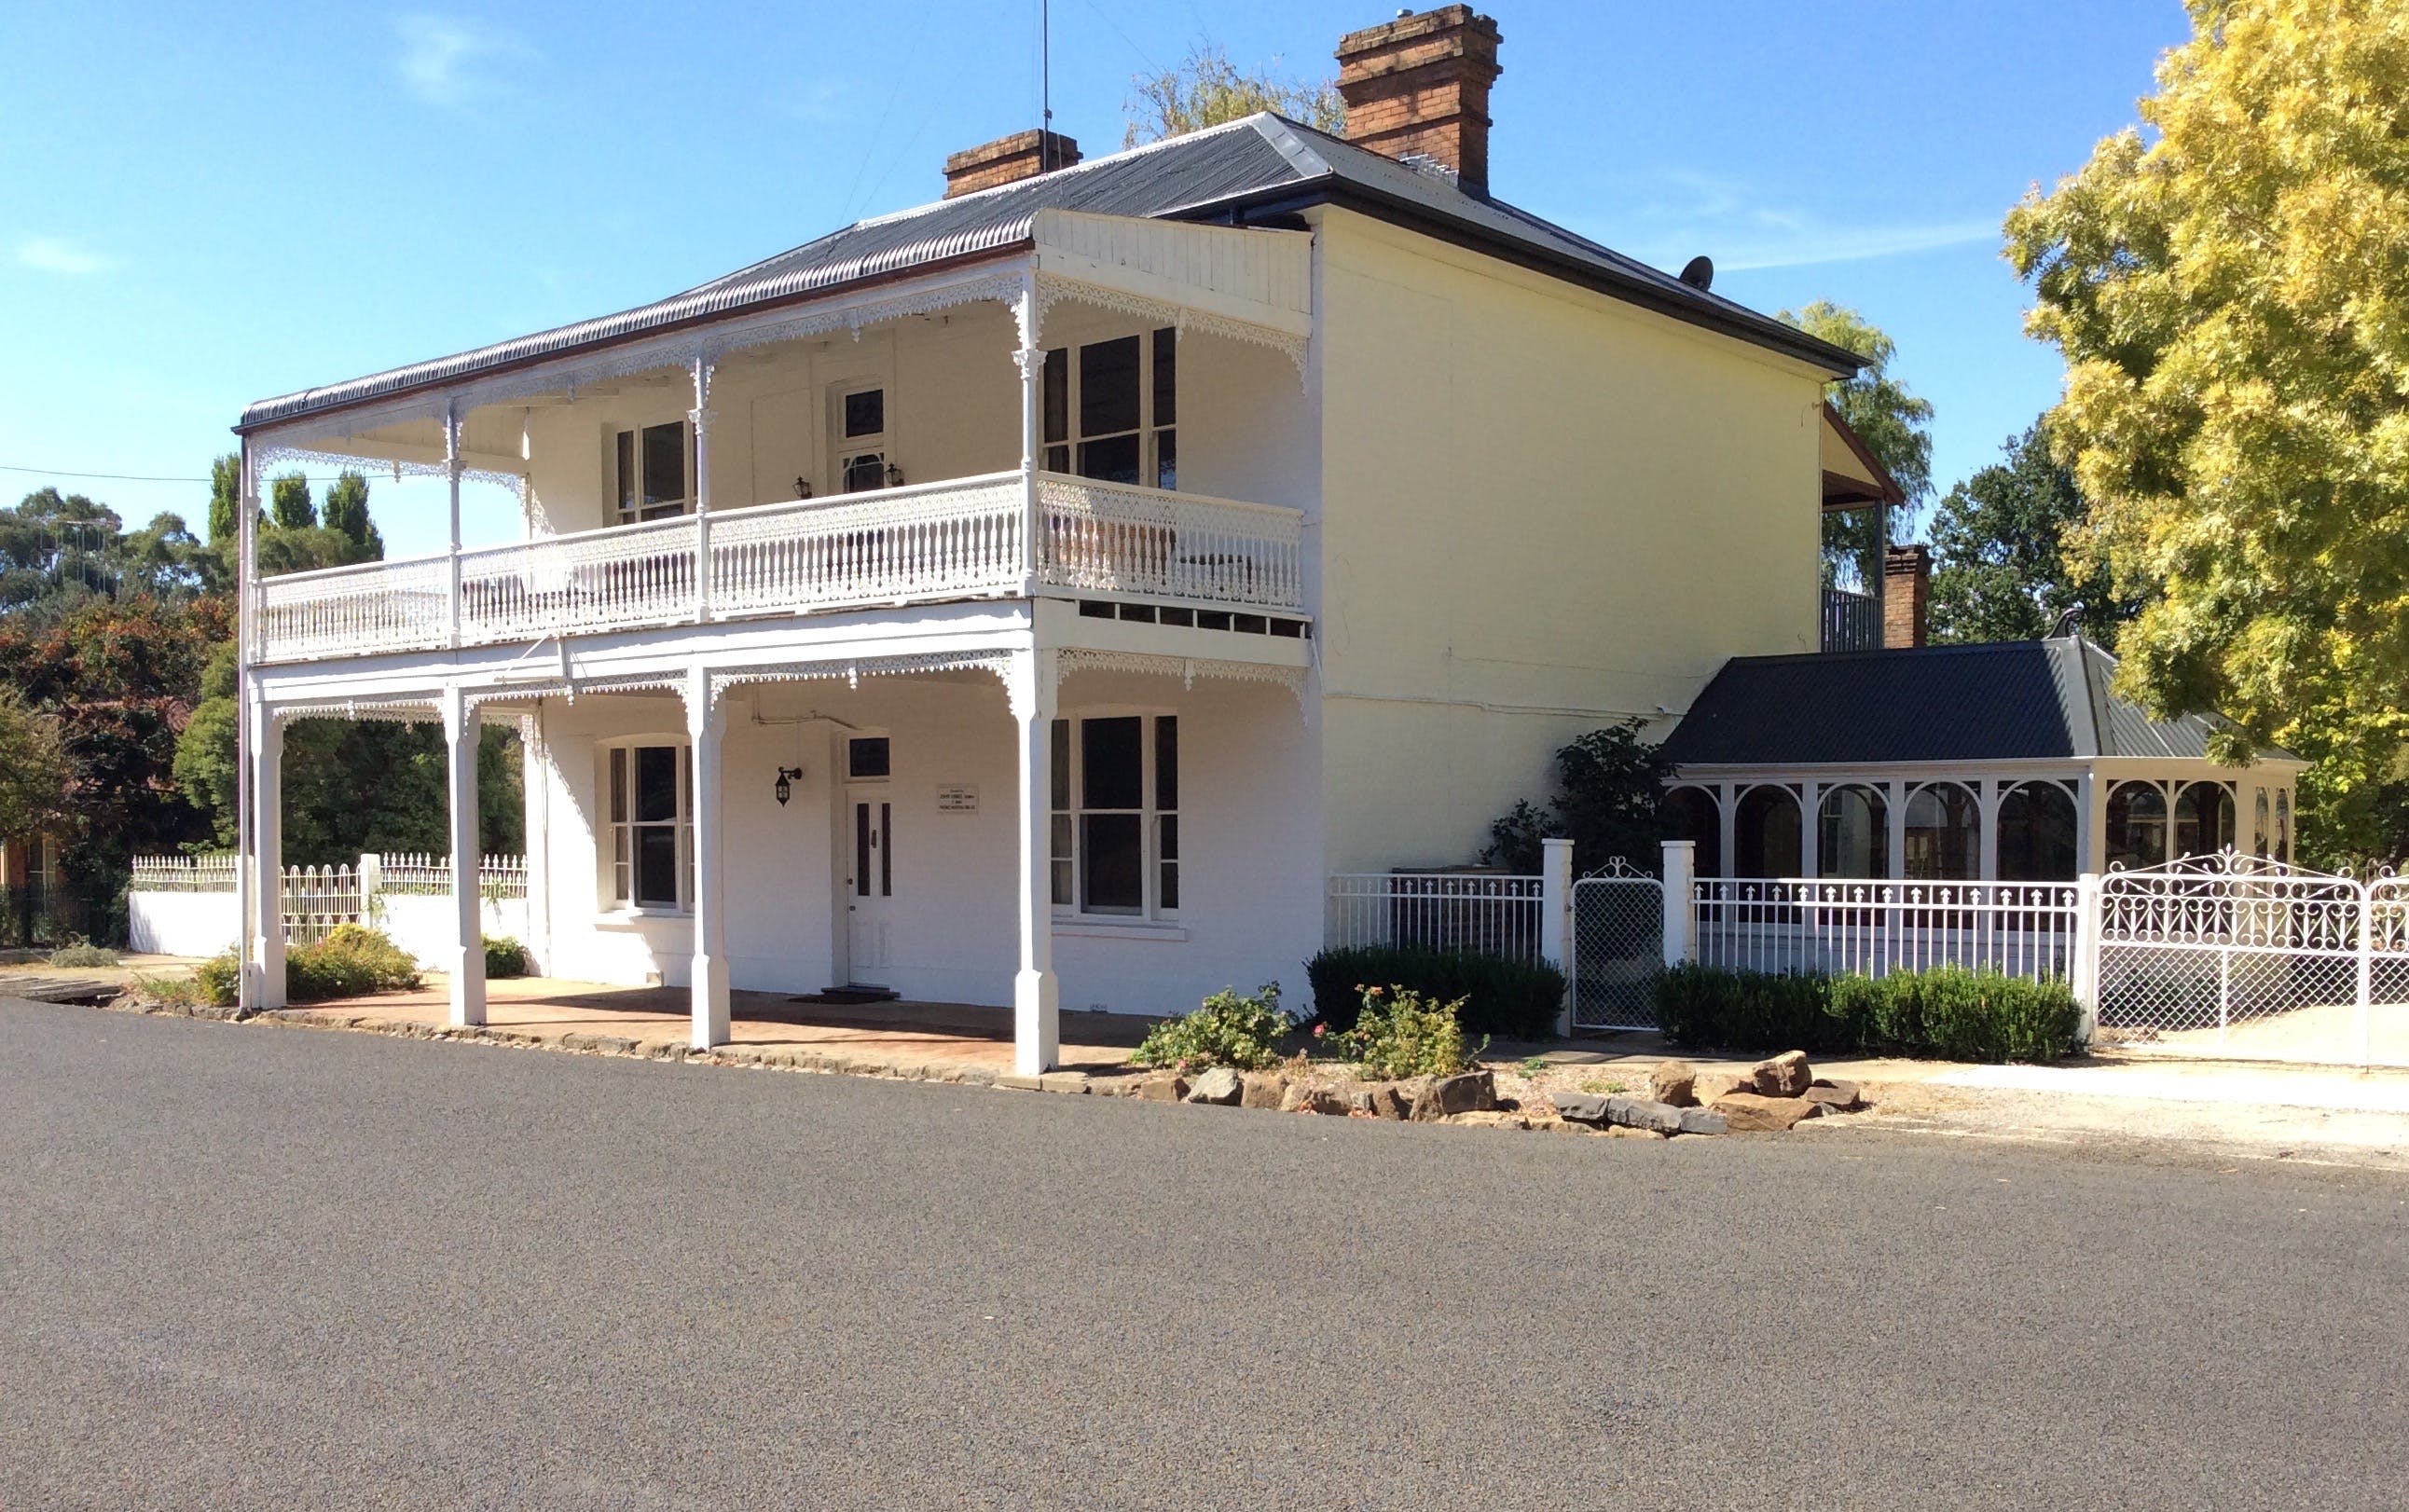 The White House Carcoar - Accommodation Resorts